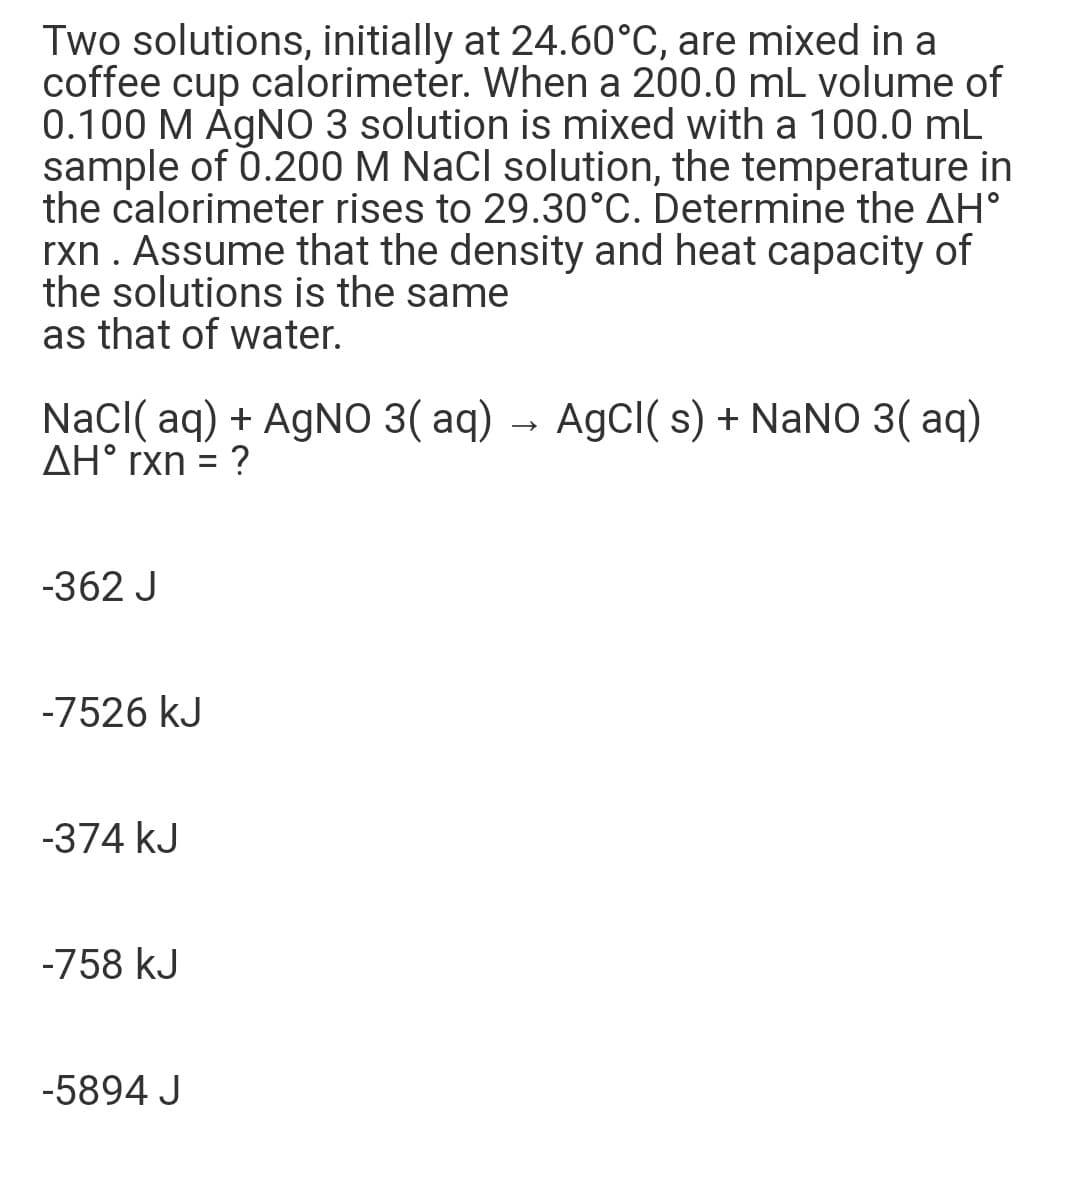 Two solutions, initially at 24.60°C, are mixed in a
coffee cup calorimeter. When a 200.0 mL volume of
0.100 M ÁGNO 3 solution is mixed with a 100.0 mL
sample of 0.200 M NaCl solution, the temperature in
the calorimeter rises to 29.30°C. Determine the AH°
rxn . Assume that the density and heat capacity of
the solutions is the same
as that of water.
NaCI( aq) + AGNO 3( aq)
AH° rxn = ?
AgCl( s) + NaNO 3( aq)
-362 J
-7526 kJ
-374 kJ
-758 kJ
-5894 J
